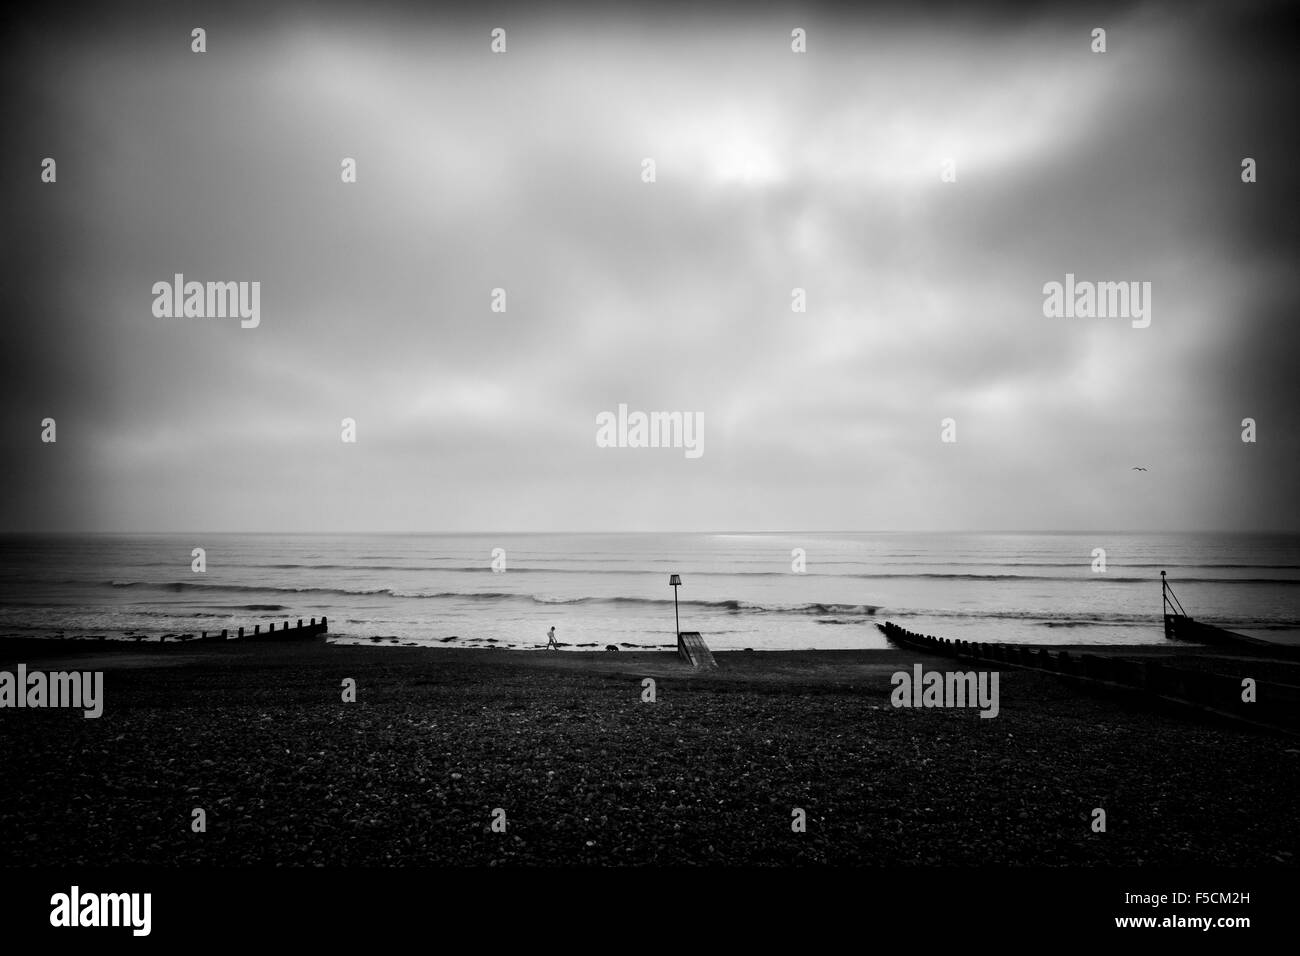 A foggy morning on 01/11/2015 at Worthing Beach, Worthing. Picture by Julie Edwards. Editors Note: This image has been converted to monochrome. Stock Photo